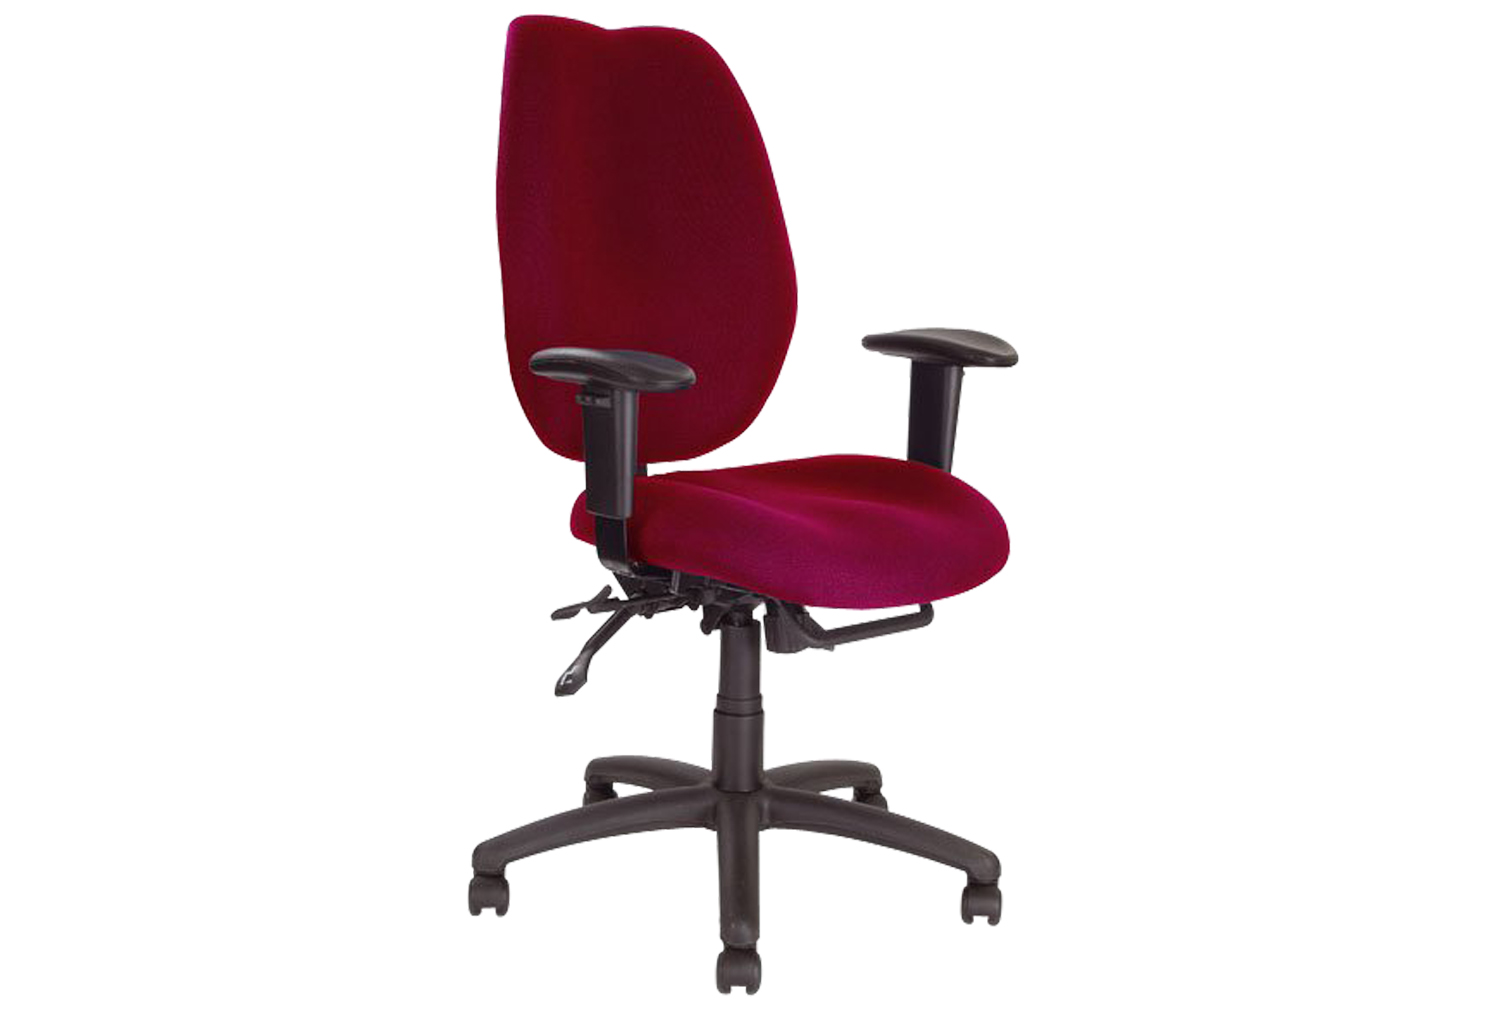 24 Hour High Back Ergonomic Operator Office Chair, Burgundy, Express Delivery